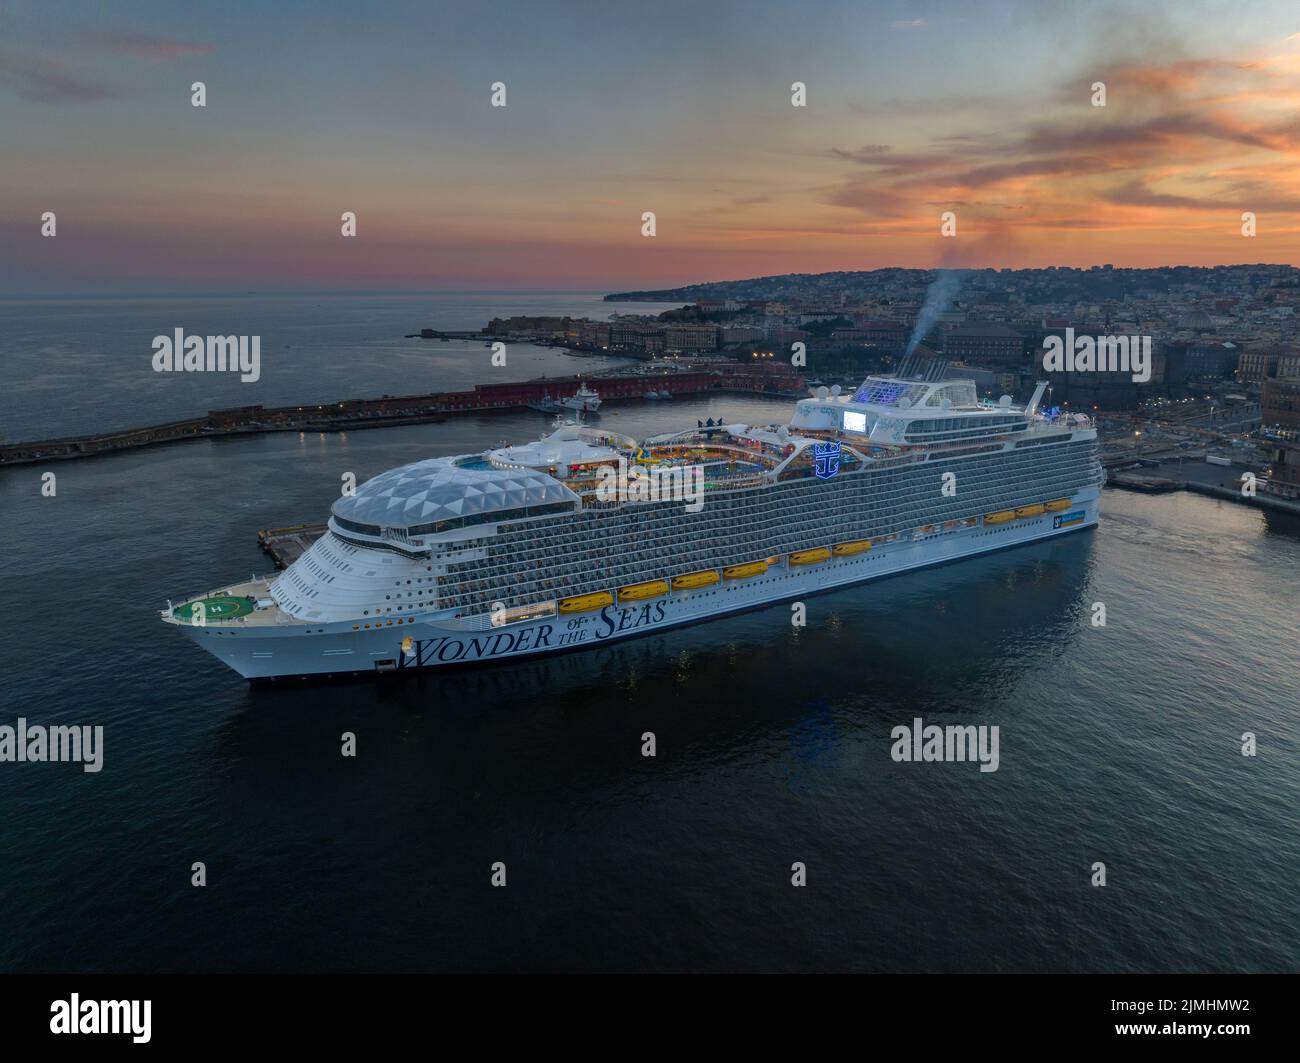 Wonder of the Seas by Royal Caribbean is The biggest cruise ship in the world in Naples port.. Aerial view Stock Photo